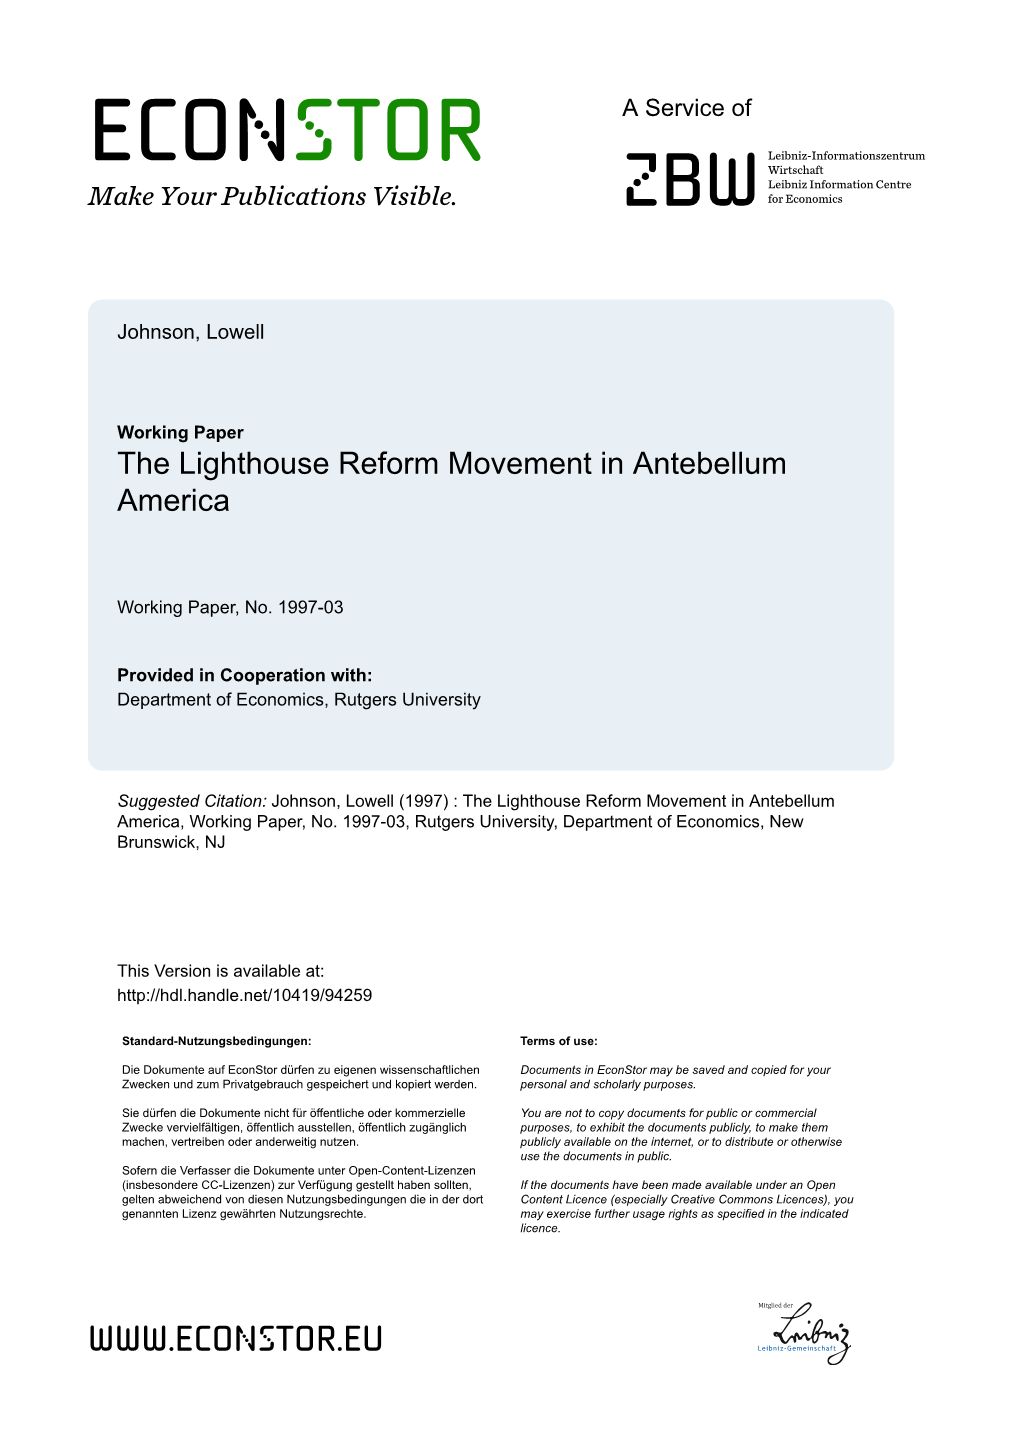 The Lighthouse Reform Movement in Antebellum America